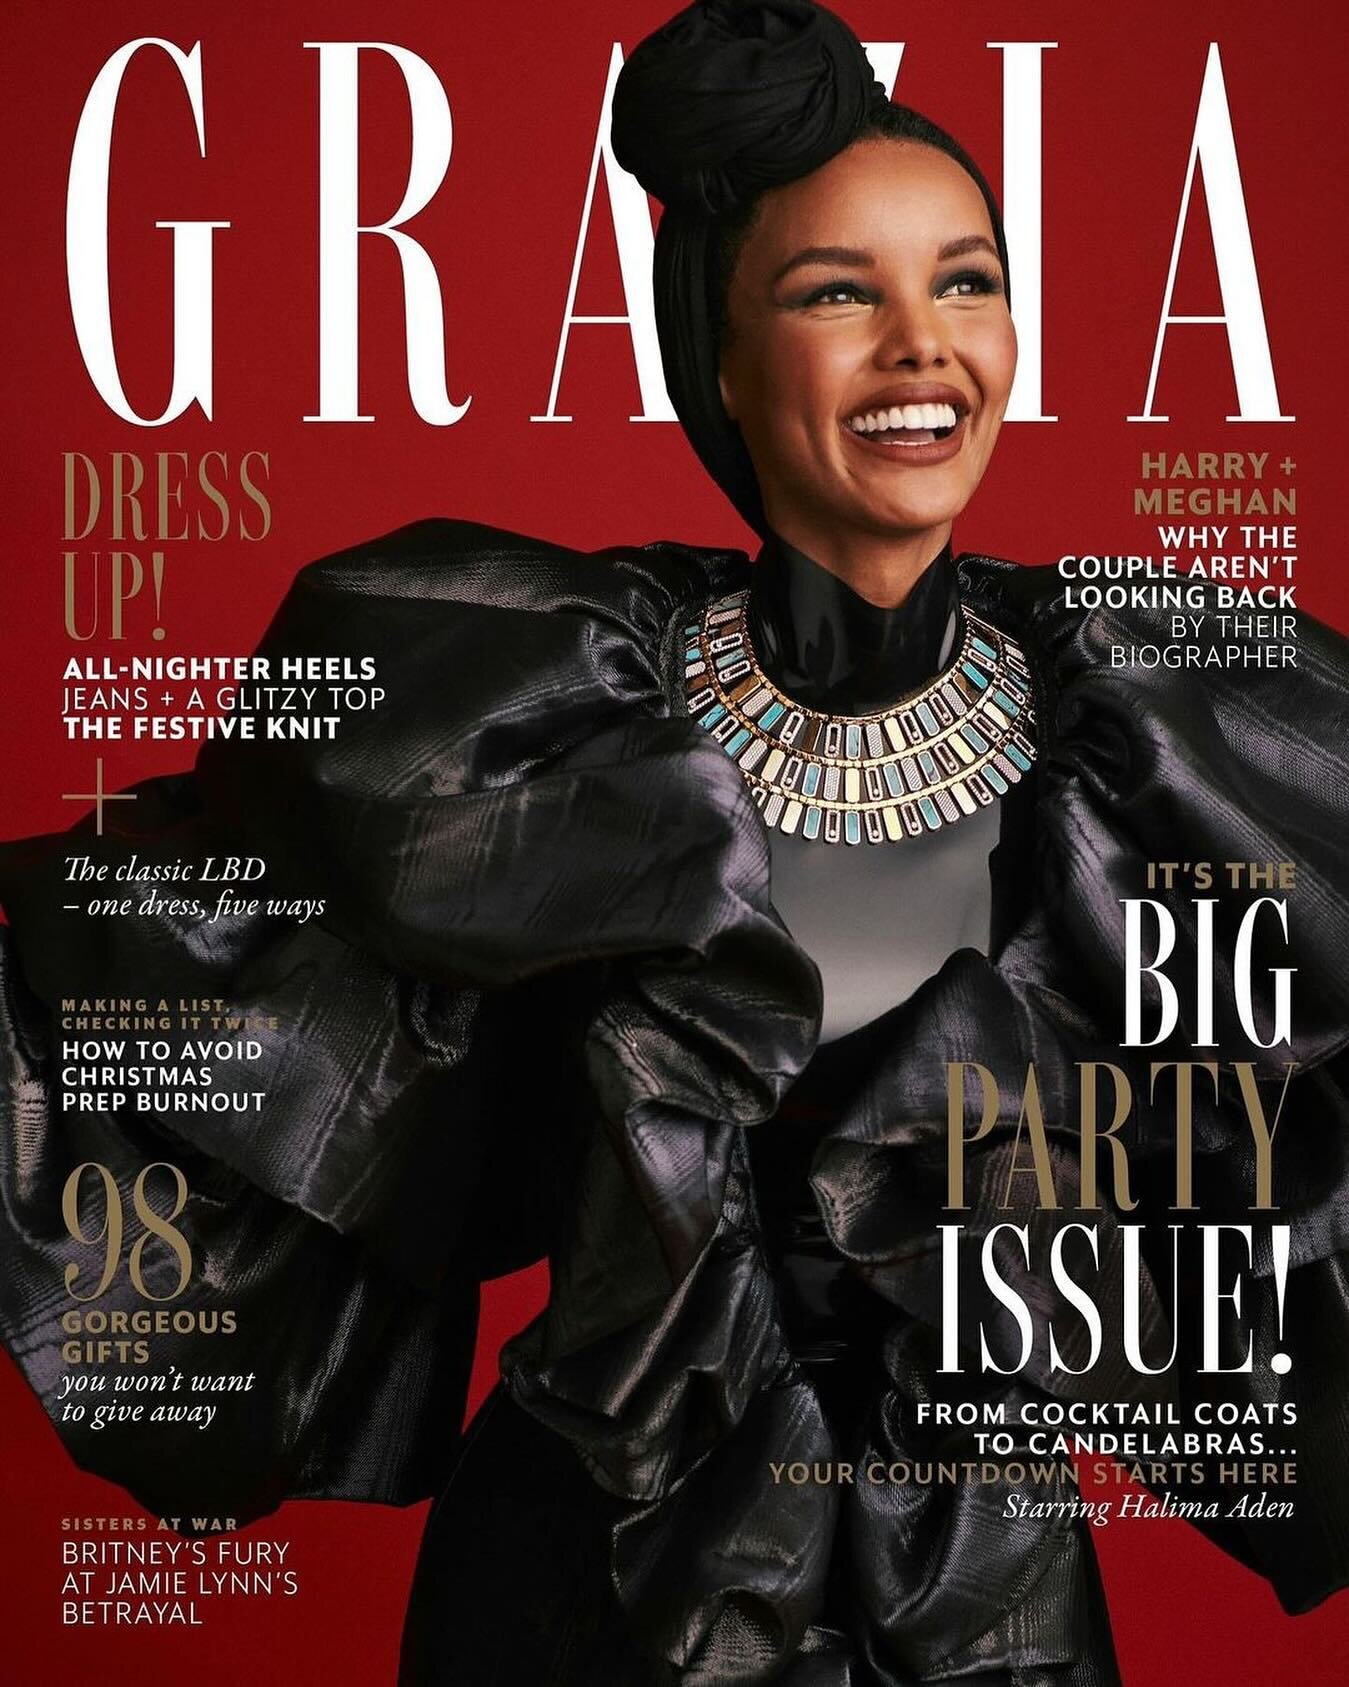 Thrilled to have collaborated with the incredible team at Grazia magazine on the latest cover featuring the stunning Halima Aden, who graced the fashion scene after a three-year hiatus. 🌟
Big shoutout to the talented individuals who made this magic 